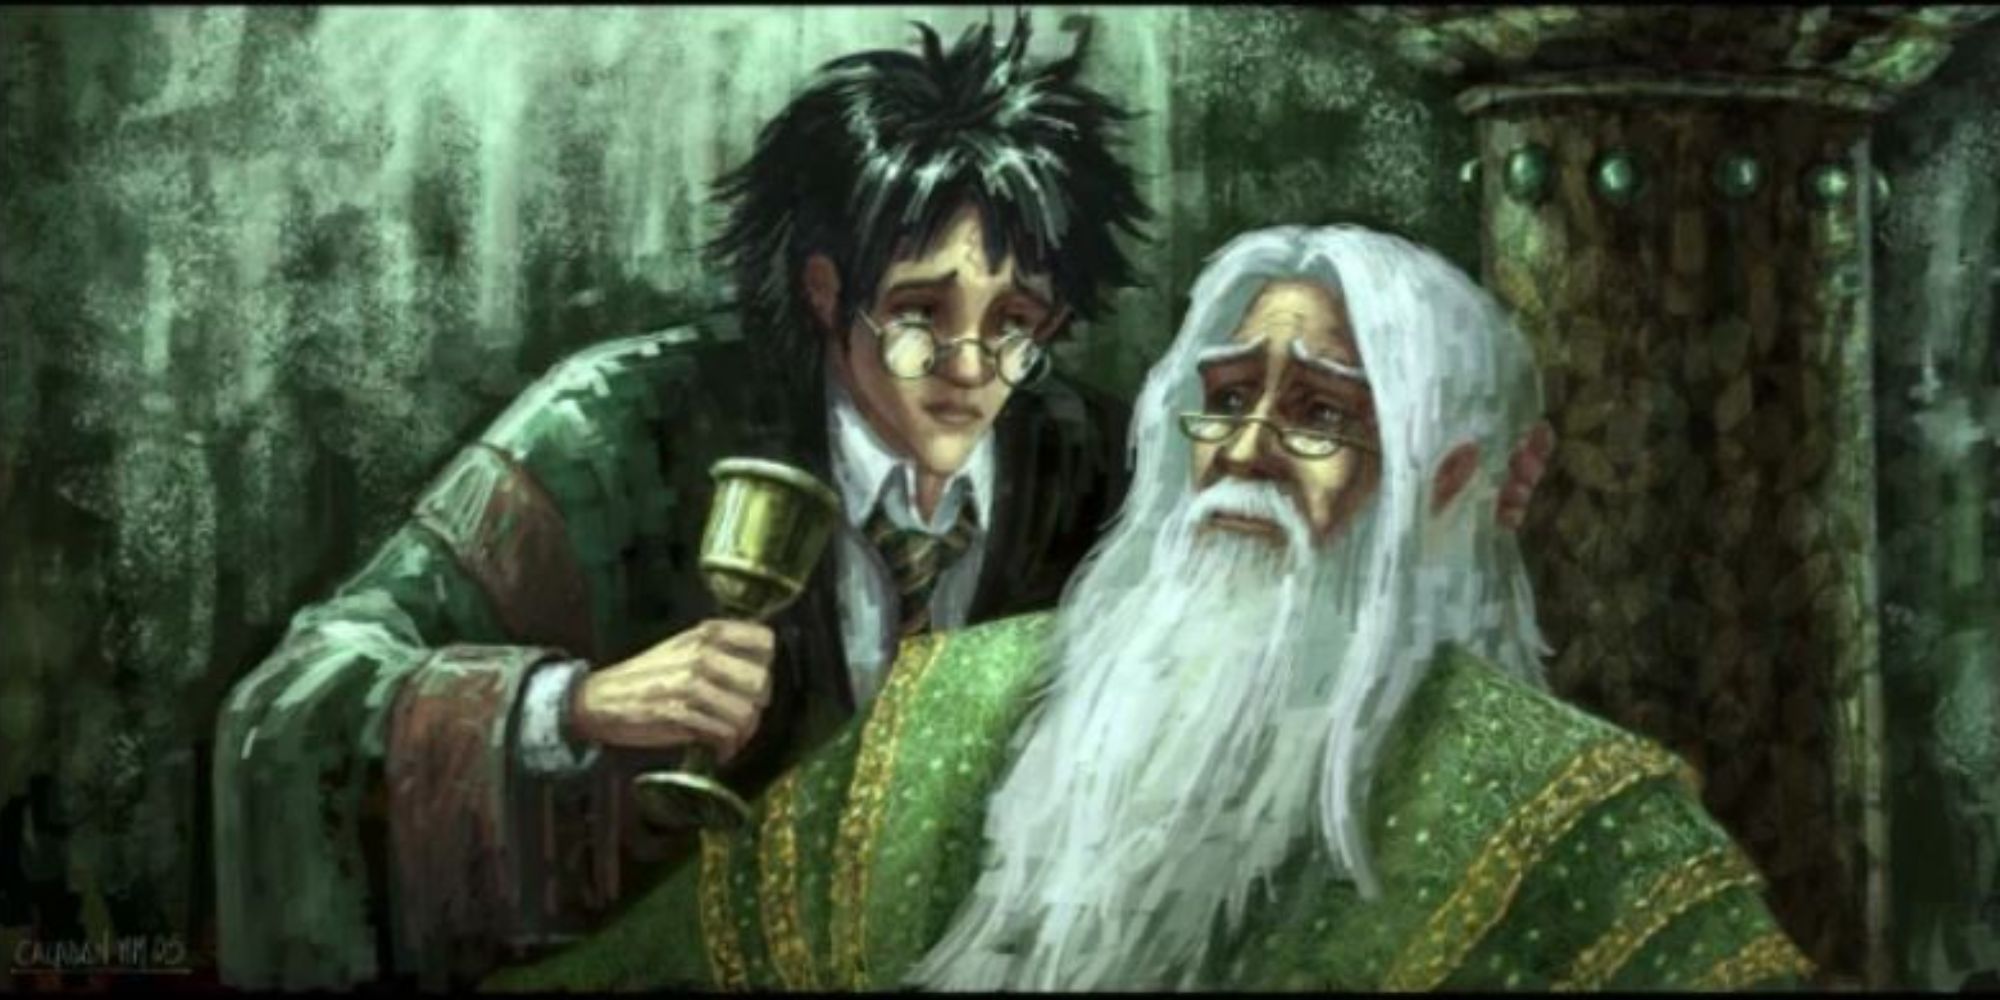 Harry grips a cup of Emerald Potion to offer to Dumbledore